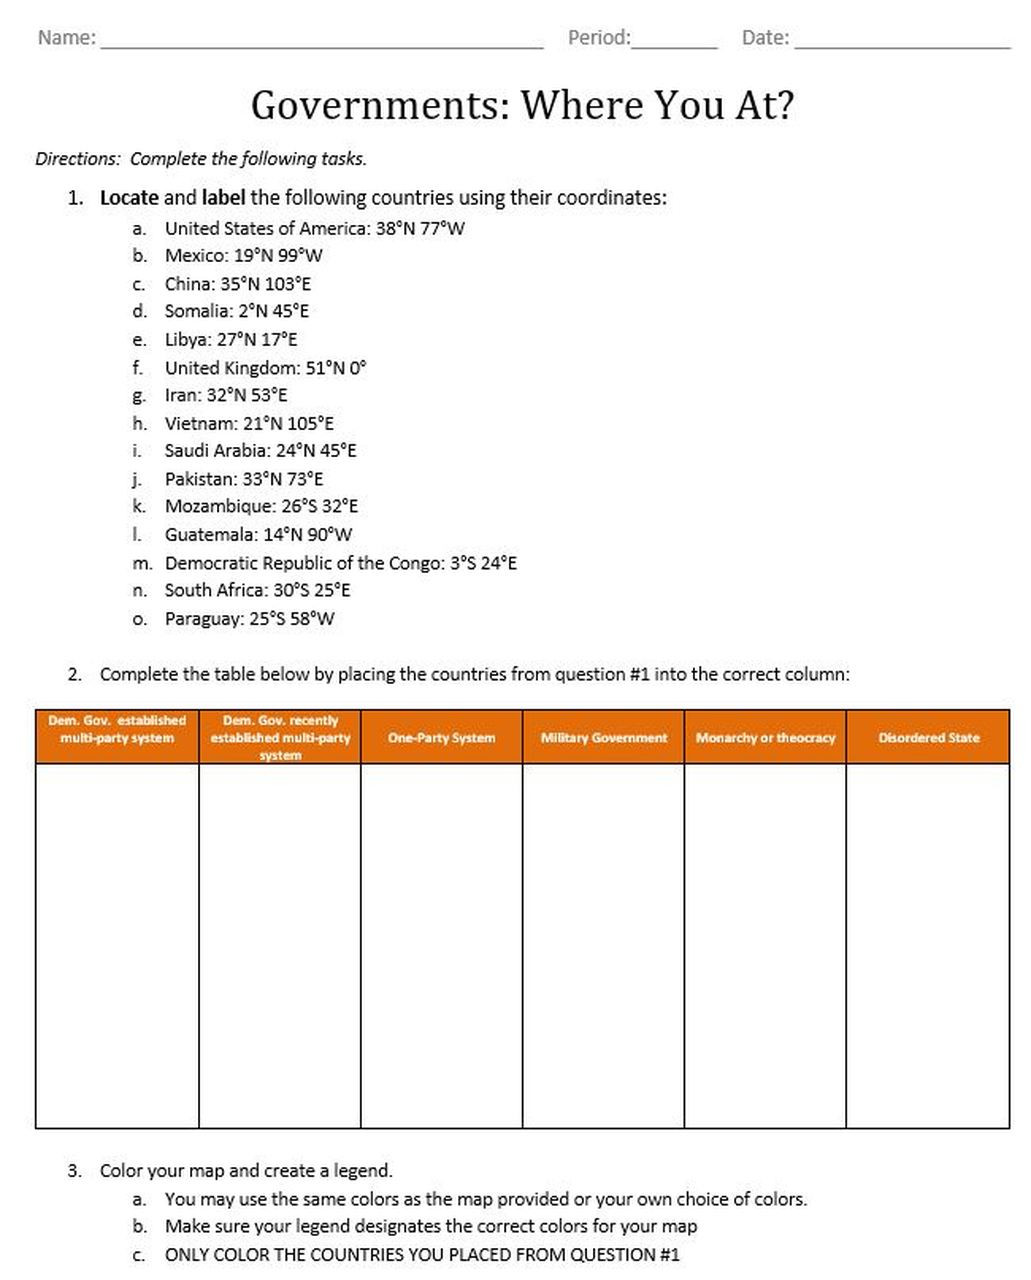 Forms Of Government Worksheet Governments where You at A Government Systems Worksheet Activity